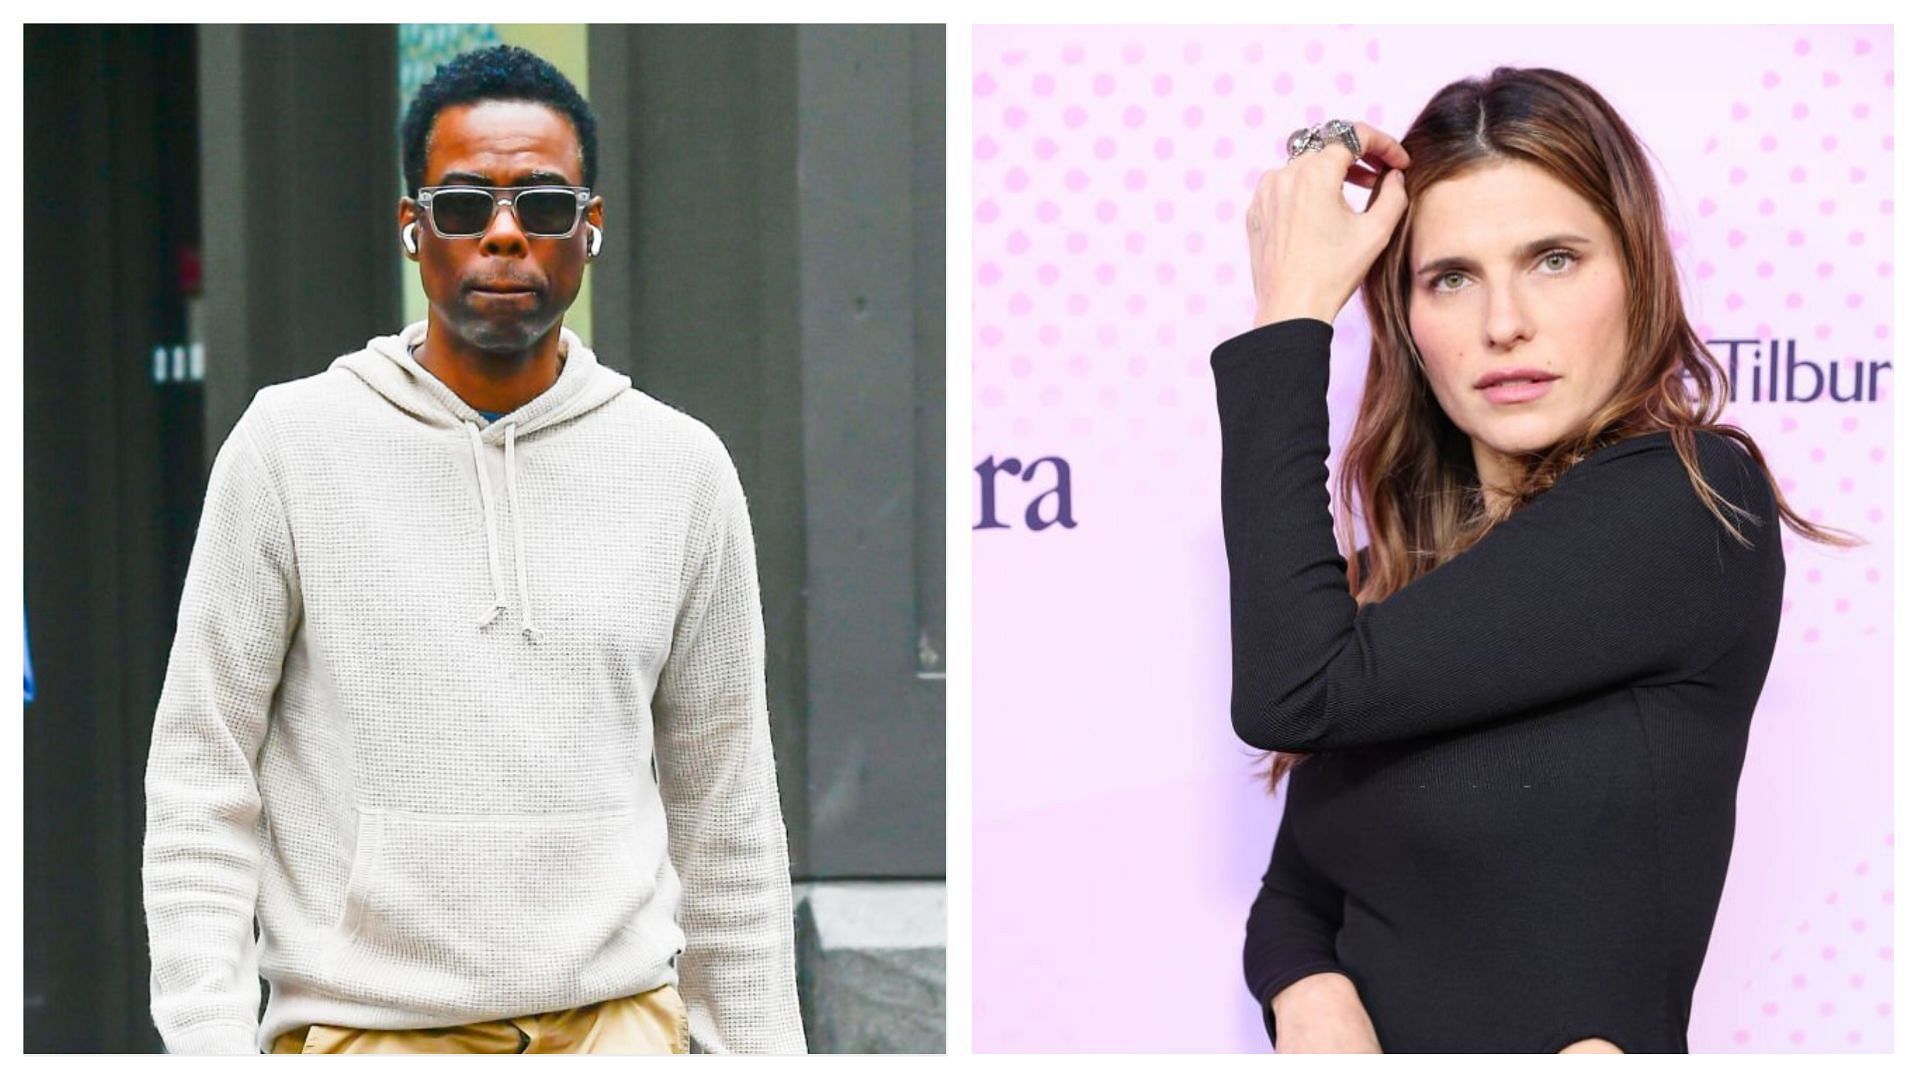 Chris Rock and Lake Bell were spotted attending a baseball game together (Images via Raymond Hall and Amy Sussman/Getty Images)